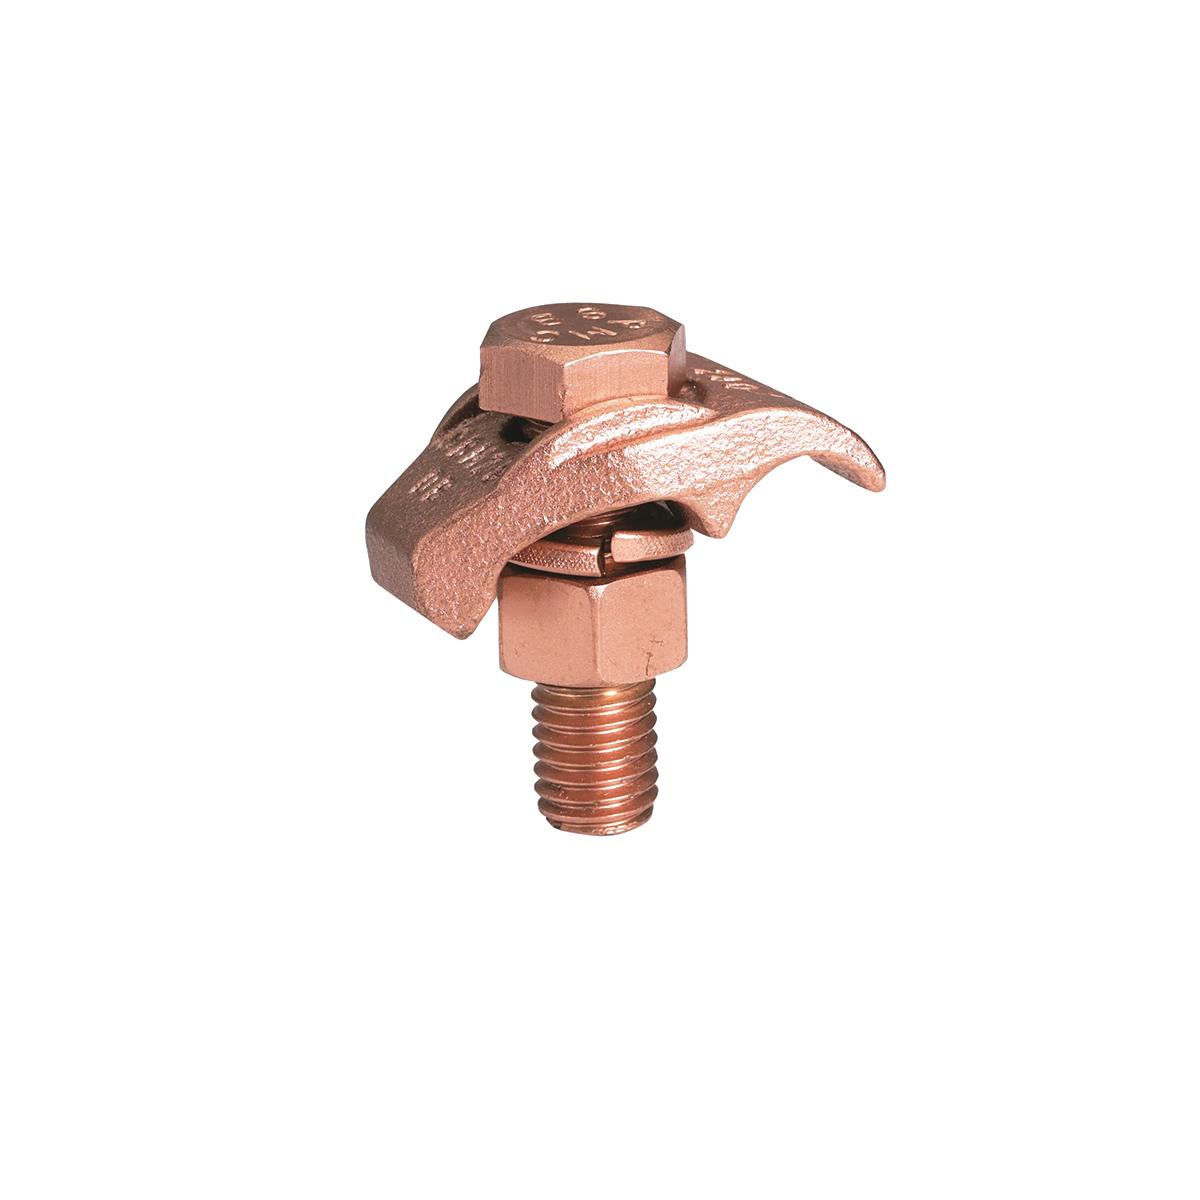 Hubbell GBM26 Mechanical Grounding Connector, Cable to 1/4" Thick Bar, 4 AWG (Sol)-2/0 AWG (Str), 3/8" Stud.  ; Features: High Copper Alloy Ground Connector For Joining A Range Of Cable To 1/4 IN Thick Bar, Type GBM Clamps Cable Directly On Bar Surface, One-Wrench Inst